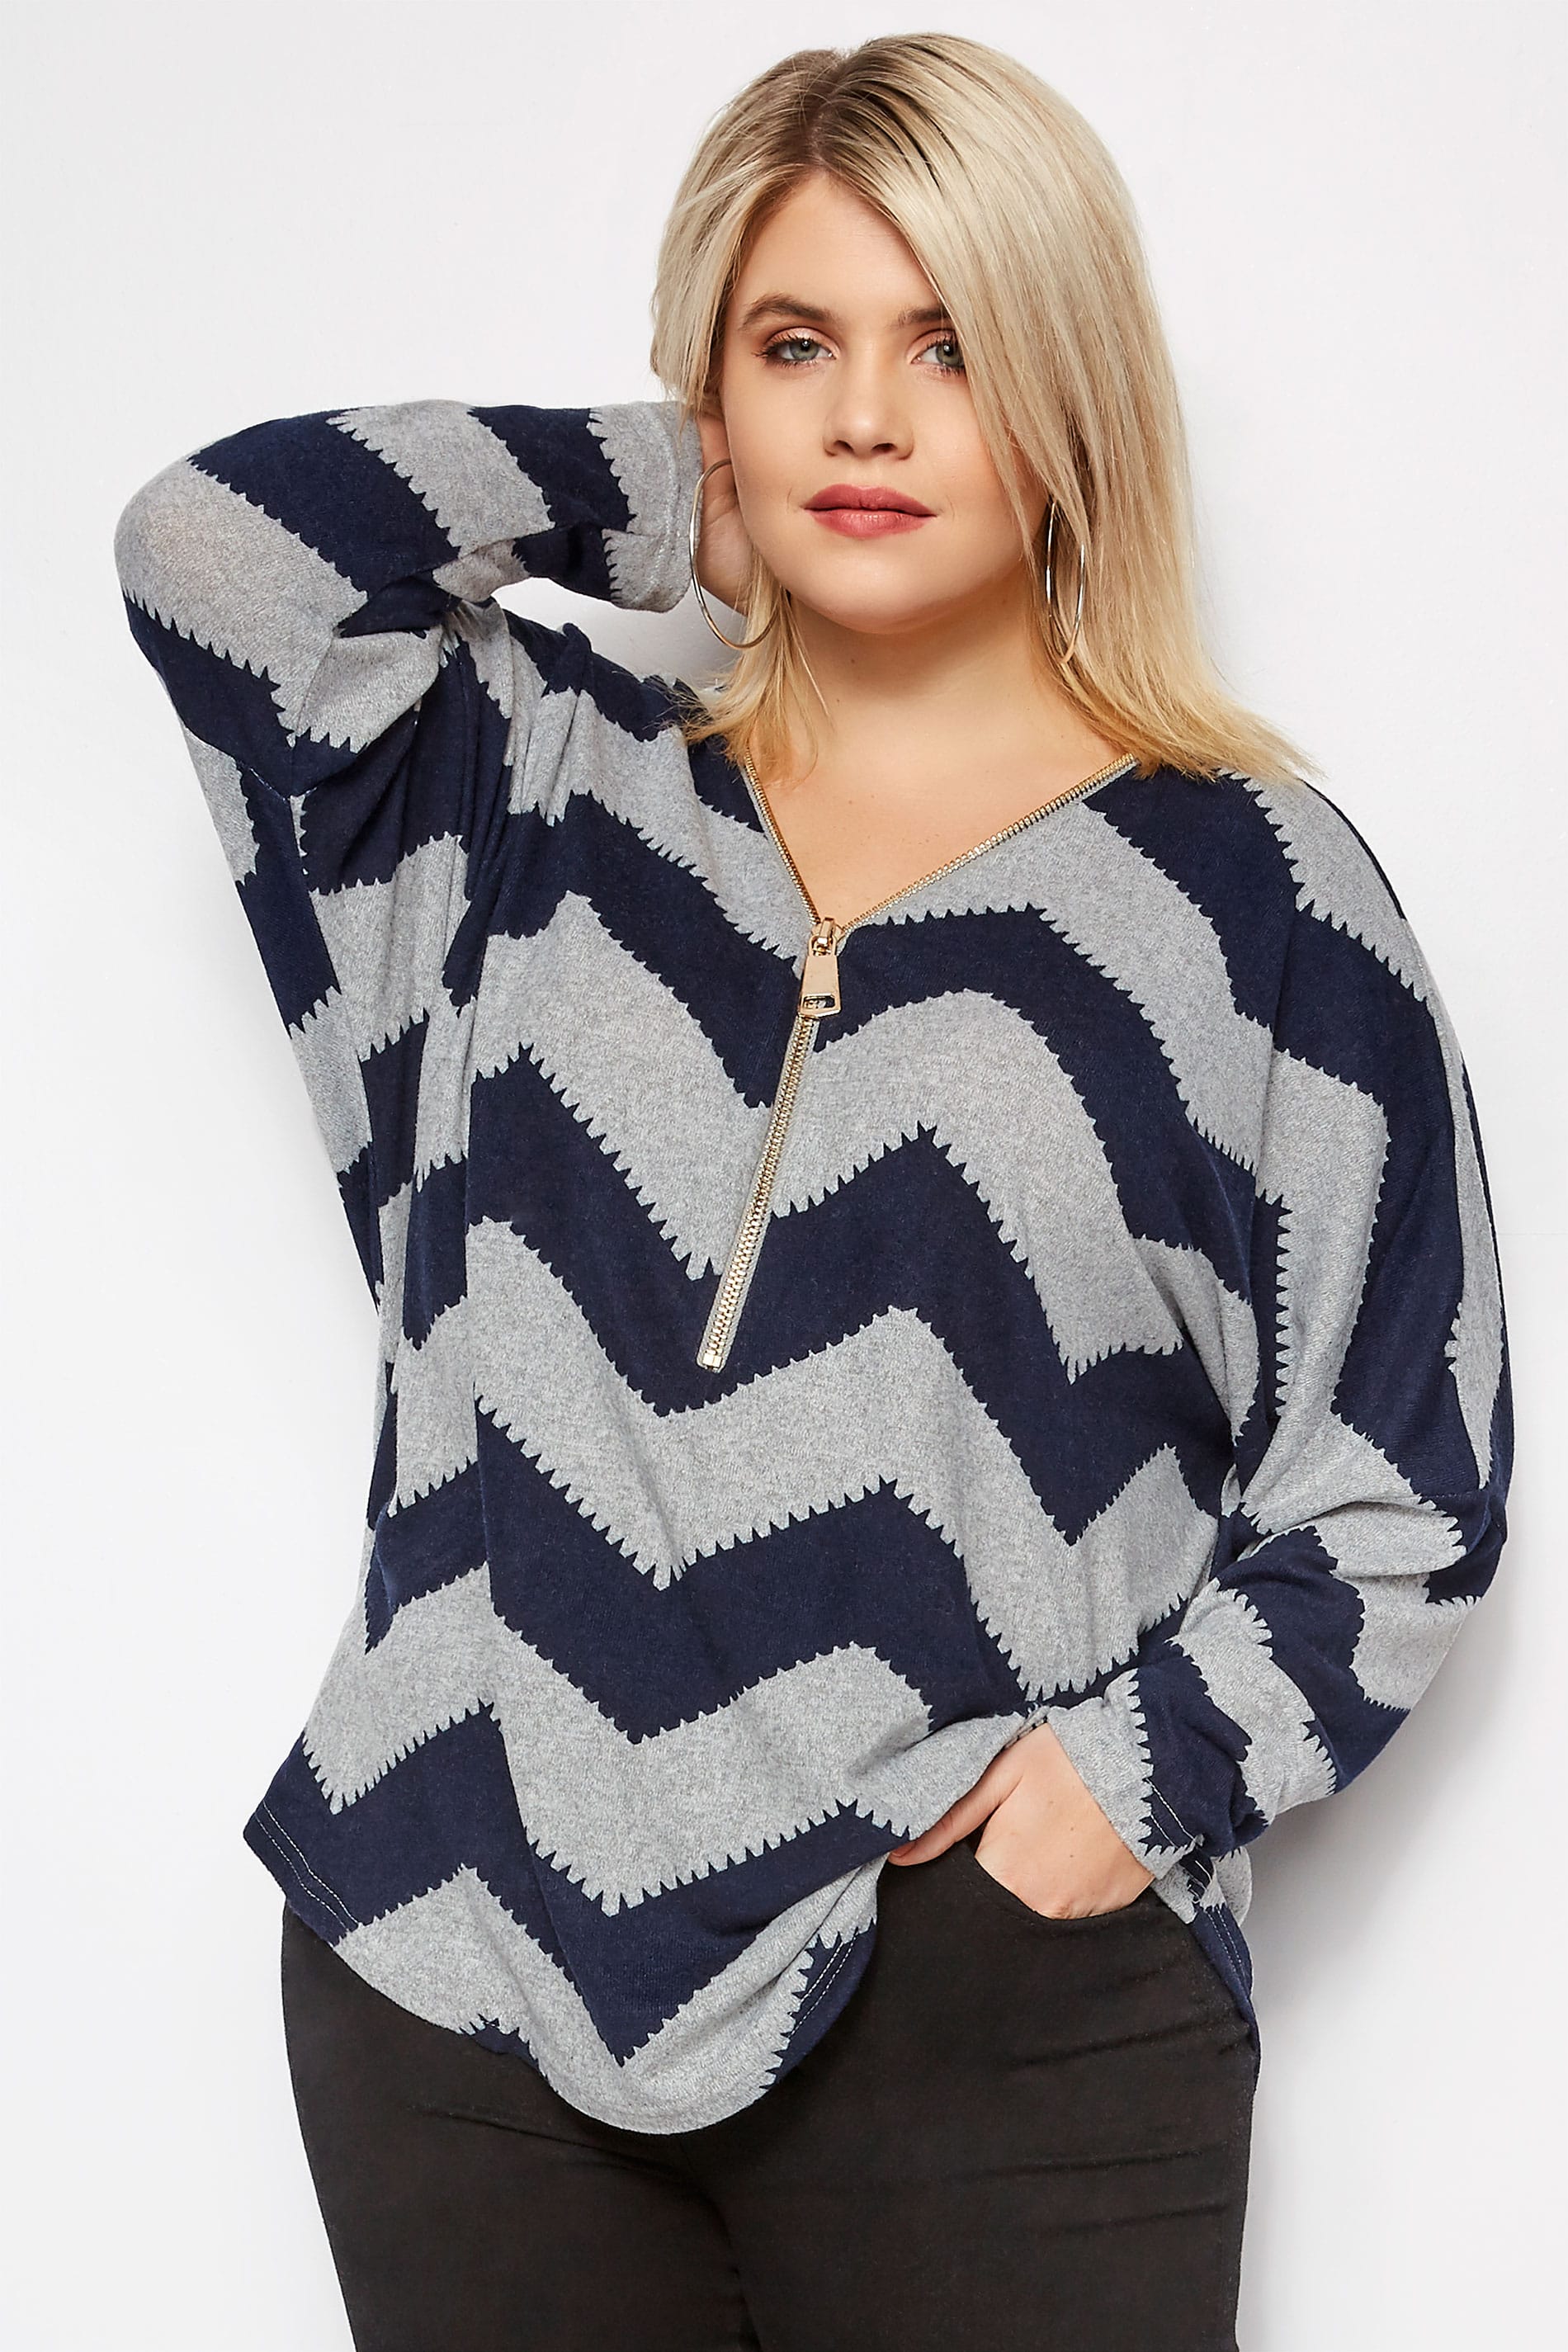 IZABEL CURVE Grey & Navy Knitted Chevron Zip Top, Plus size 16 to 26